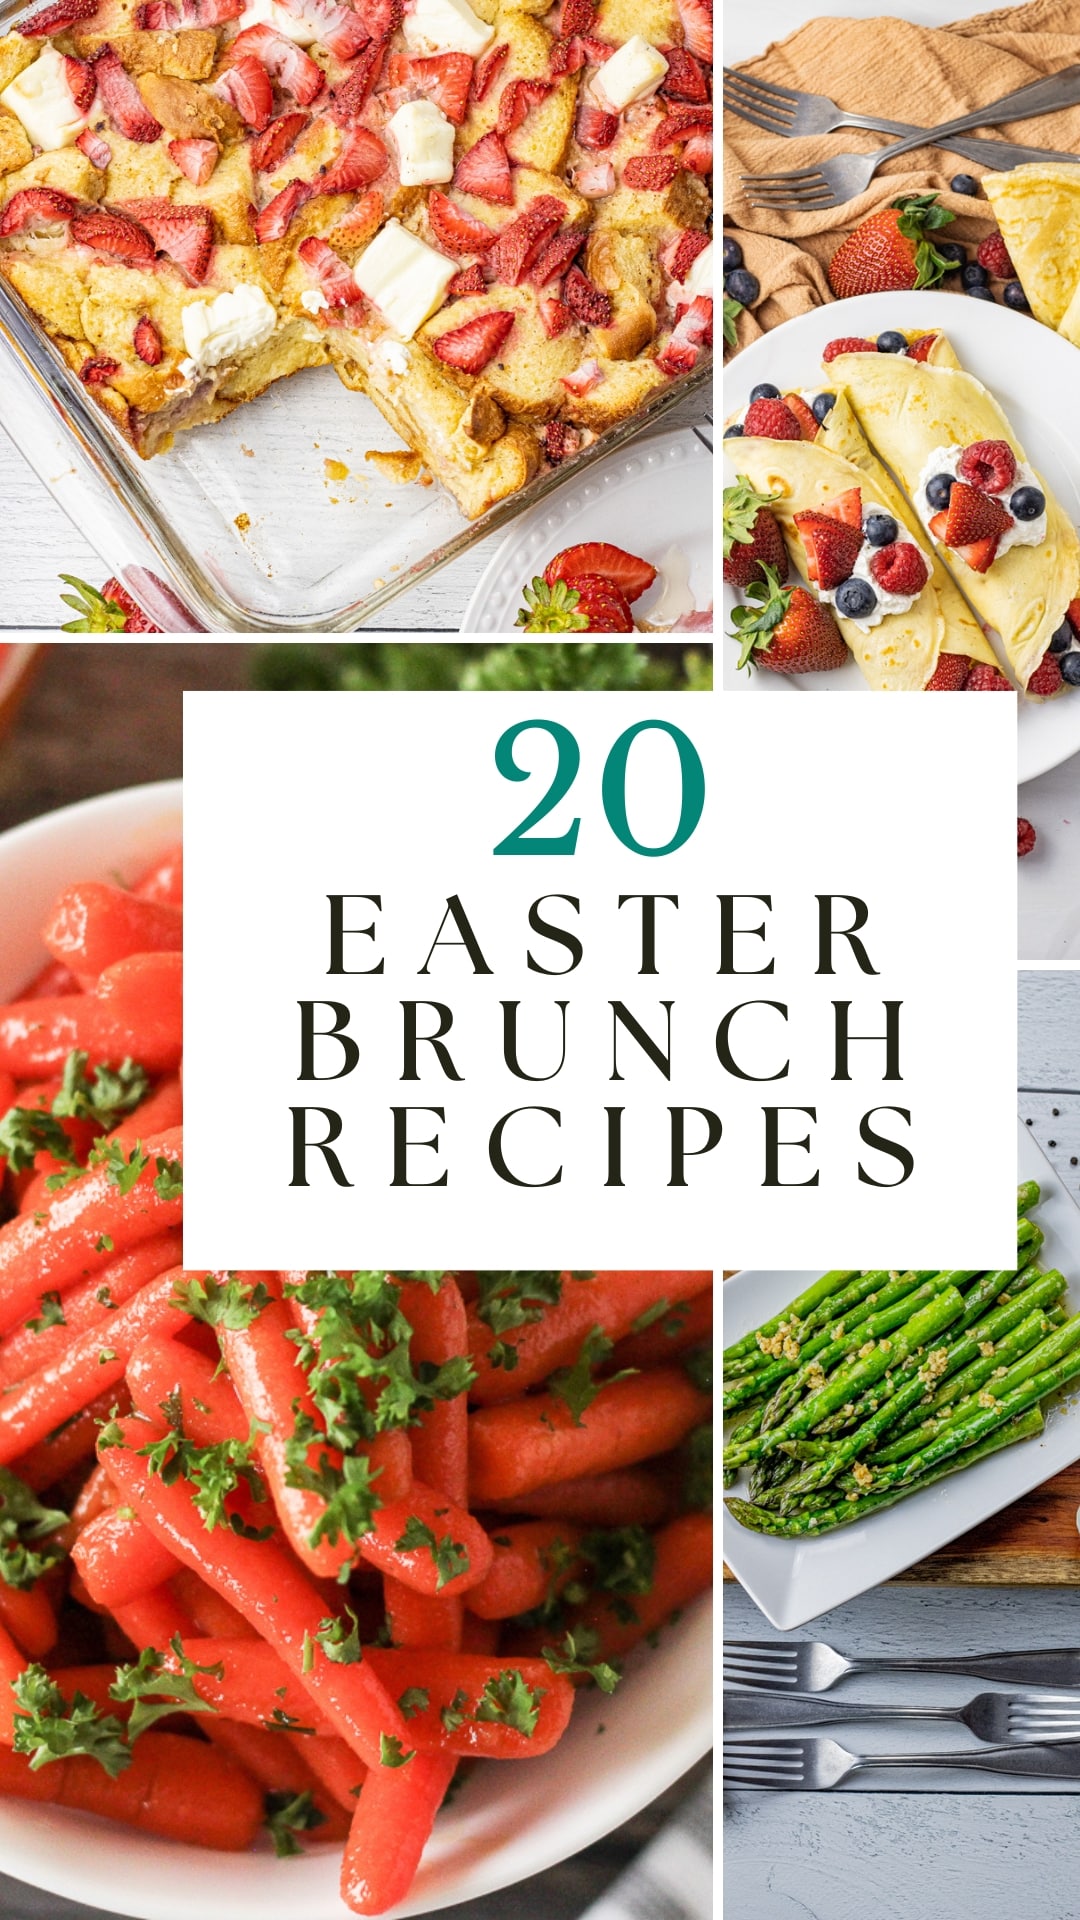 Get everyone energized for that family Easter egg hunt with the right fuel! Easter Sunday is the perfect day for a delicious later breakfast or brunch. There are so many yummy recipes to set the day off right.